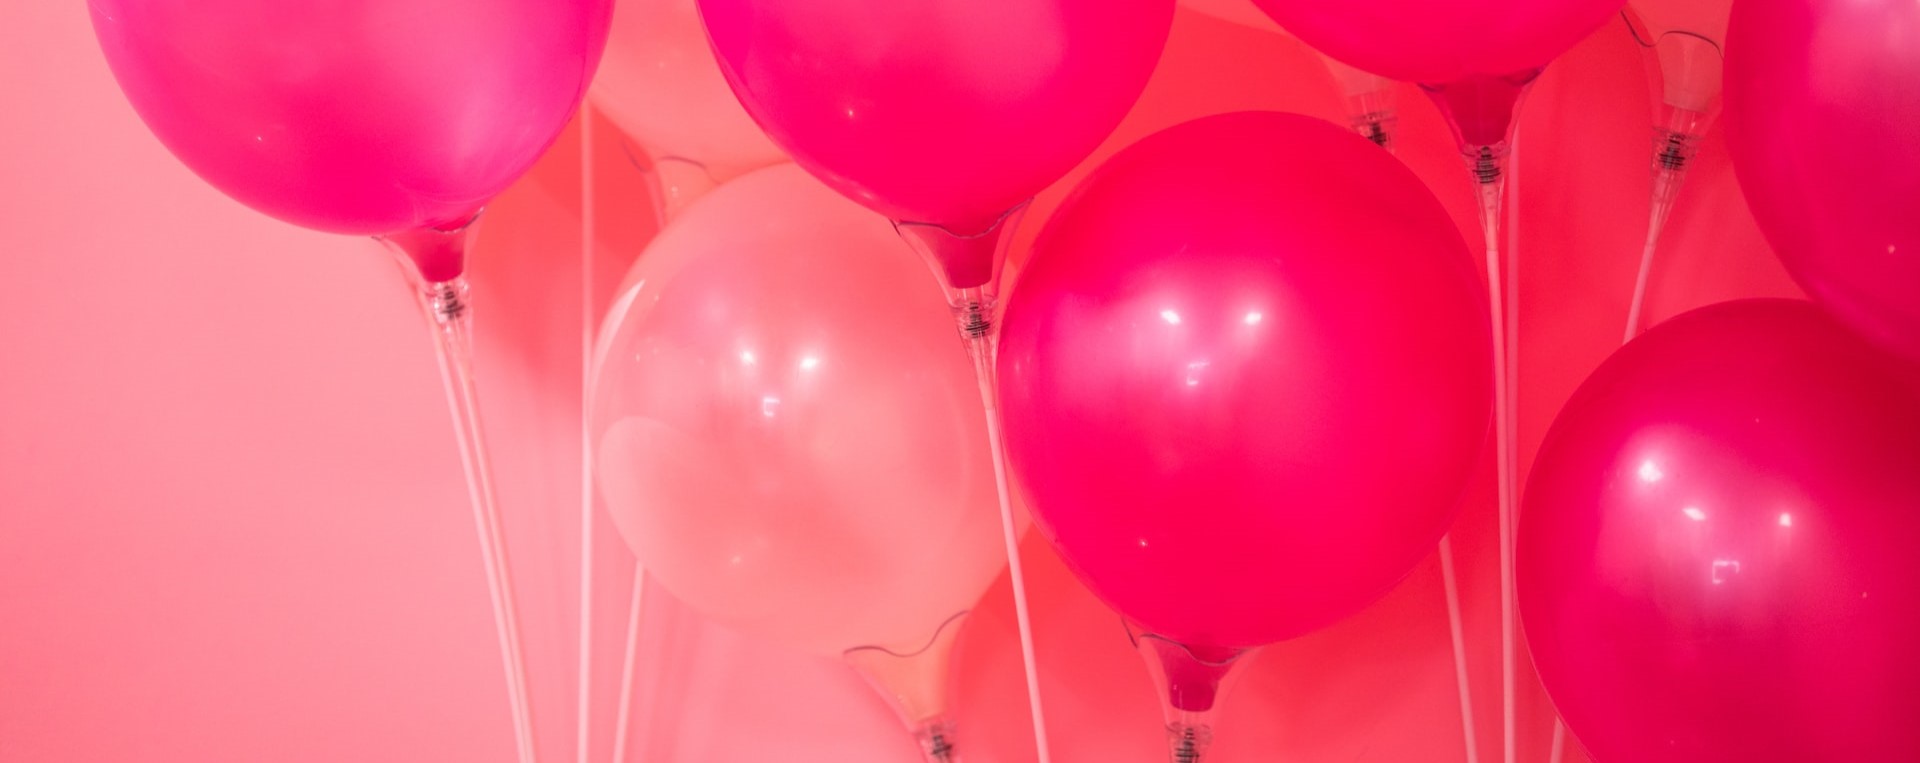 Pink Balloons | Breast Cancer Car Donations